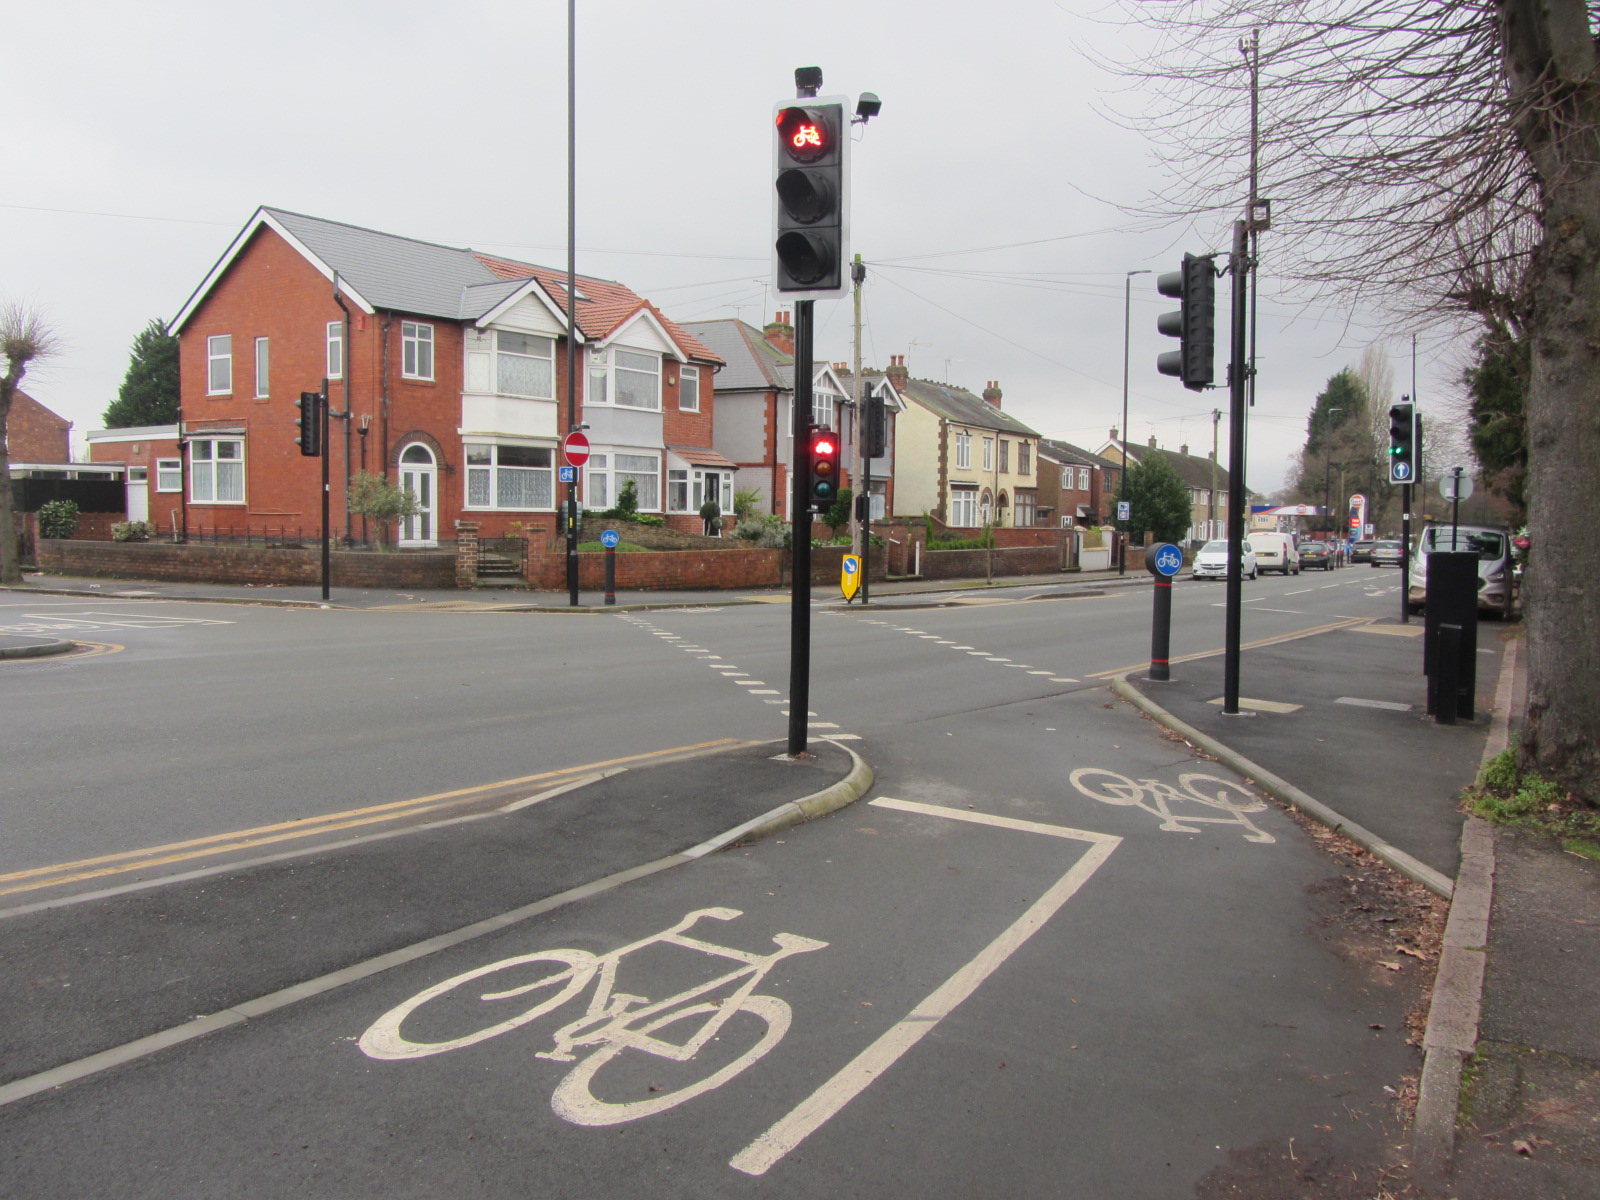 Traffic signals at controlled junctions of the cycle way